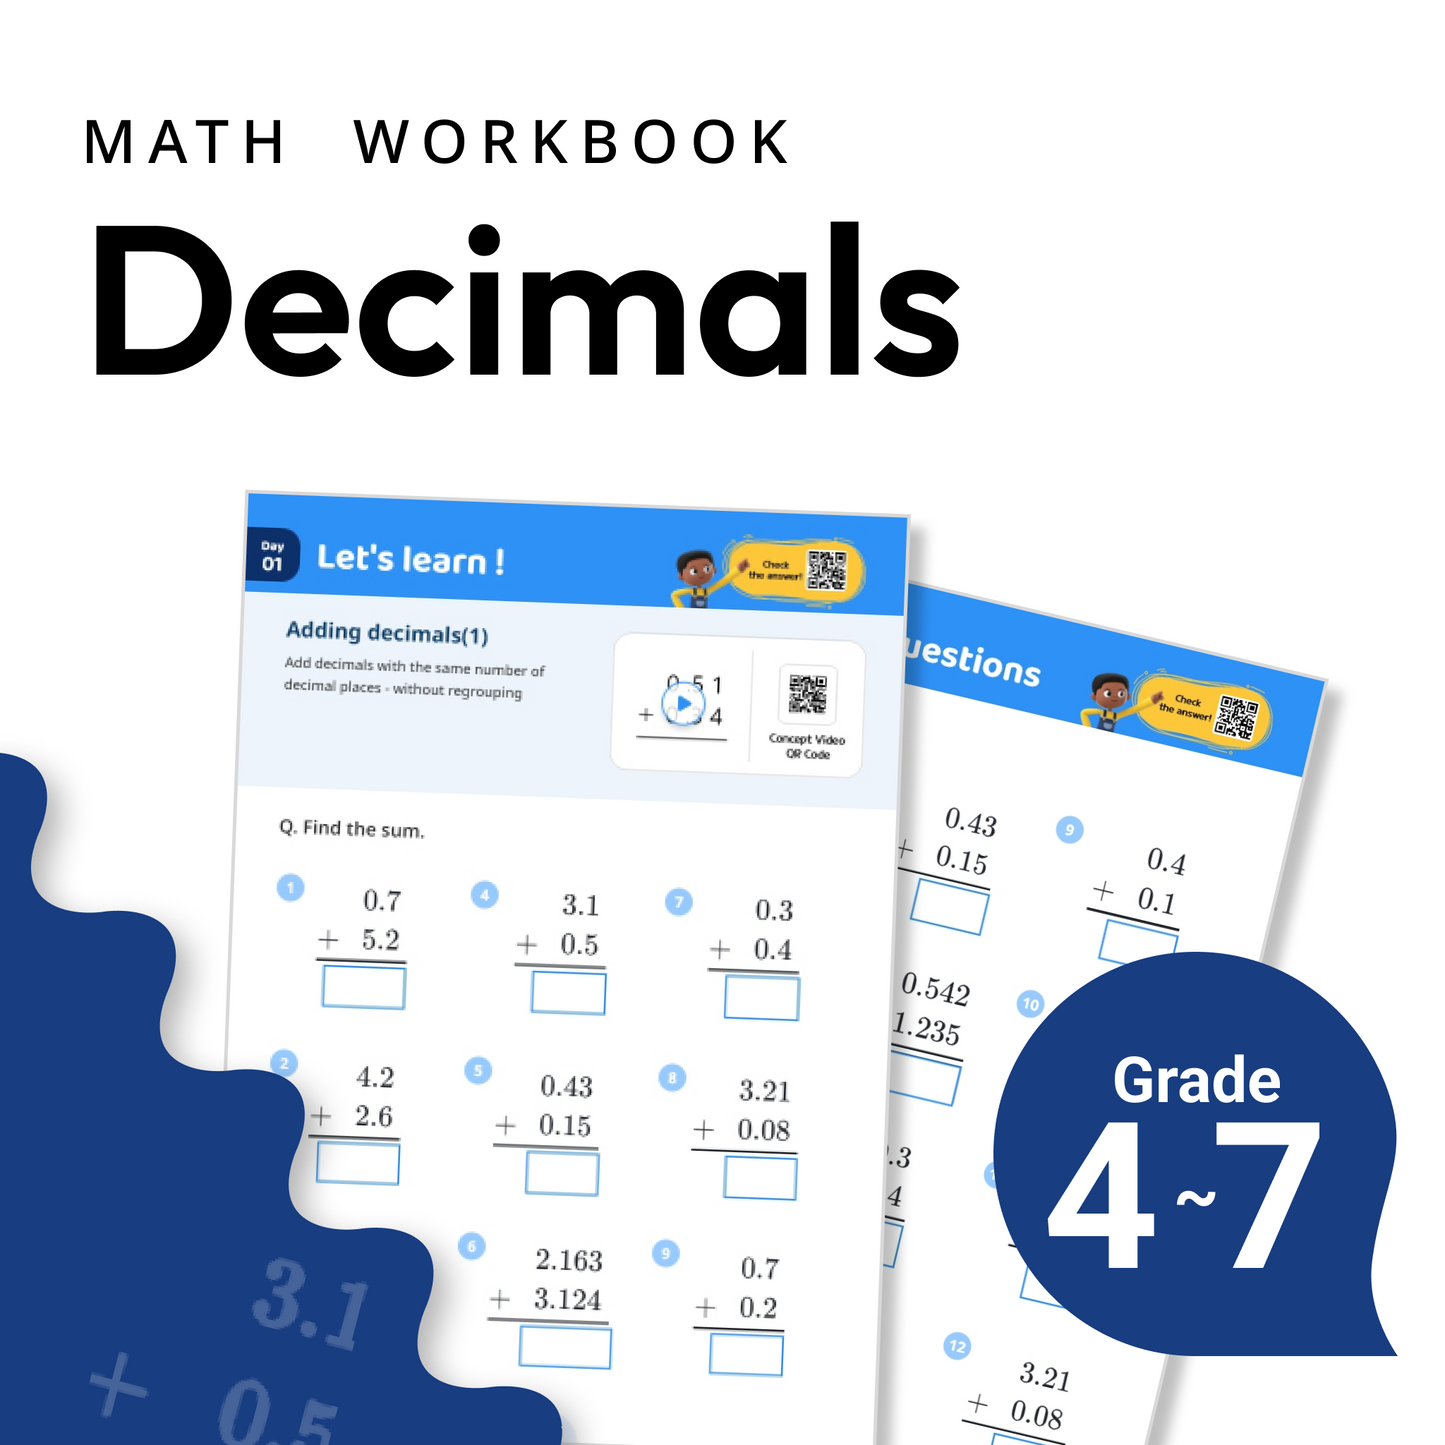 Expressing_fractions_as_decimals